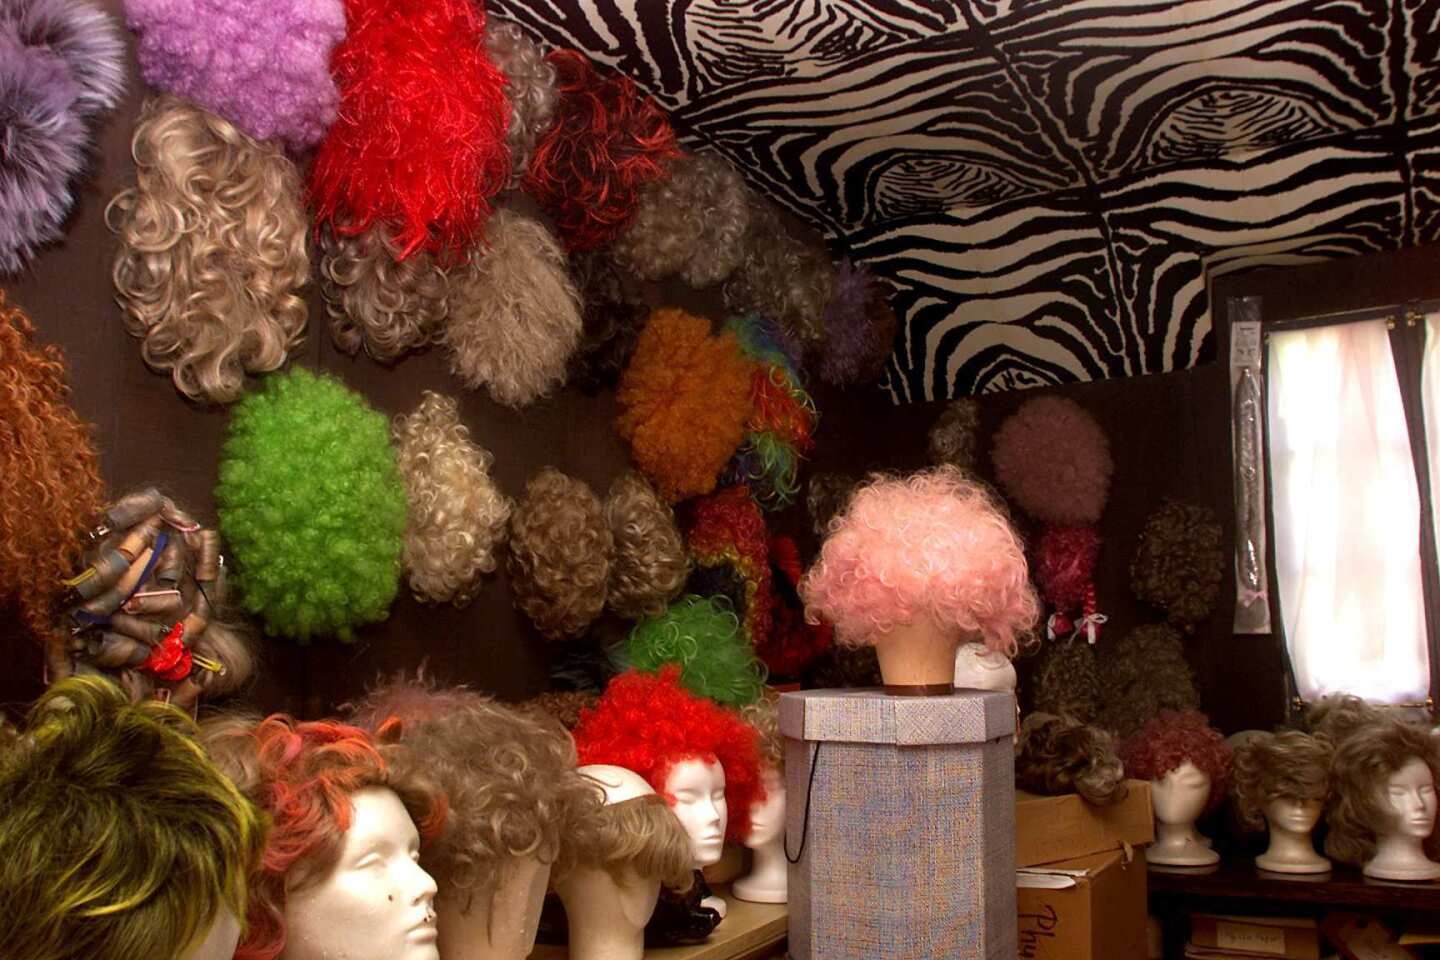 Phyllis Diller's costume and wig room included hair pieces of seemingly every color. How many? She responded with her signature laugh, saying, "I never counted."